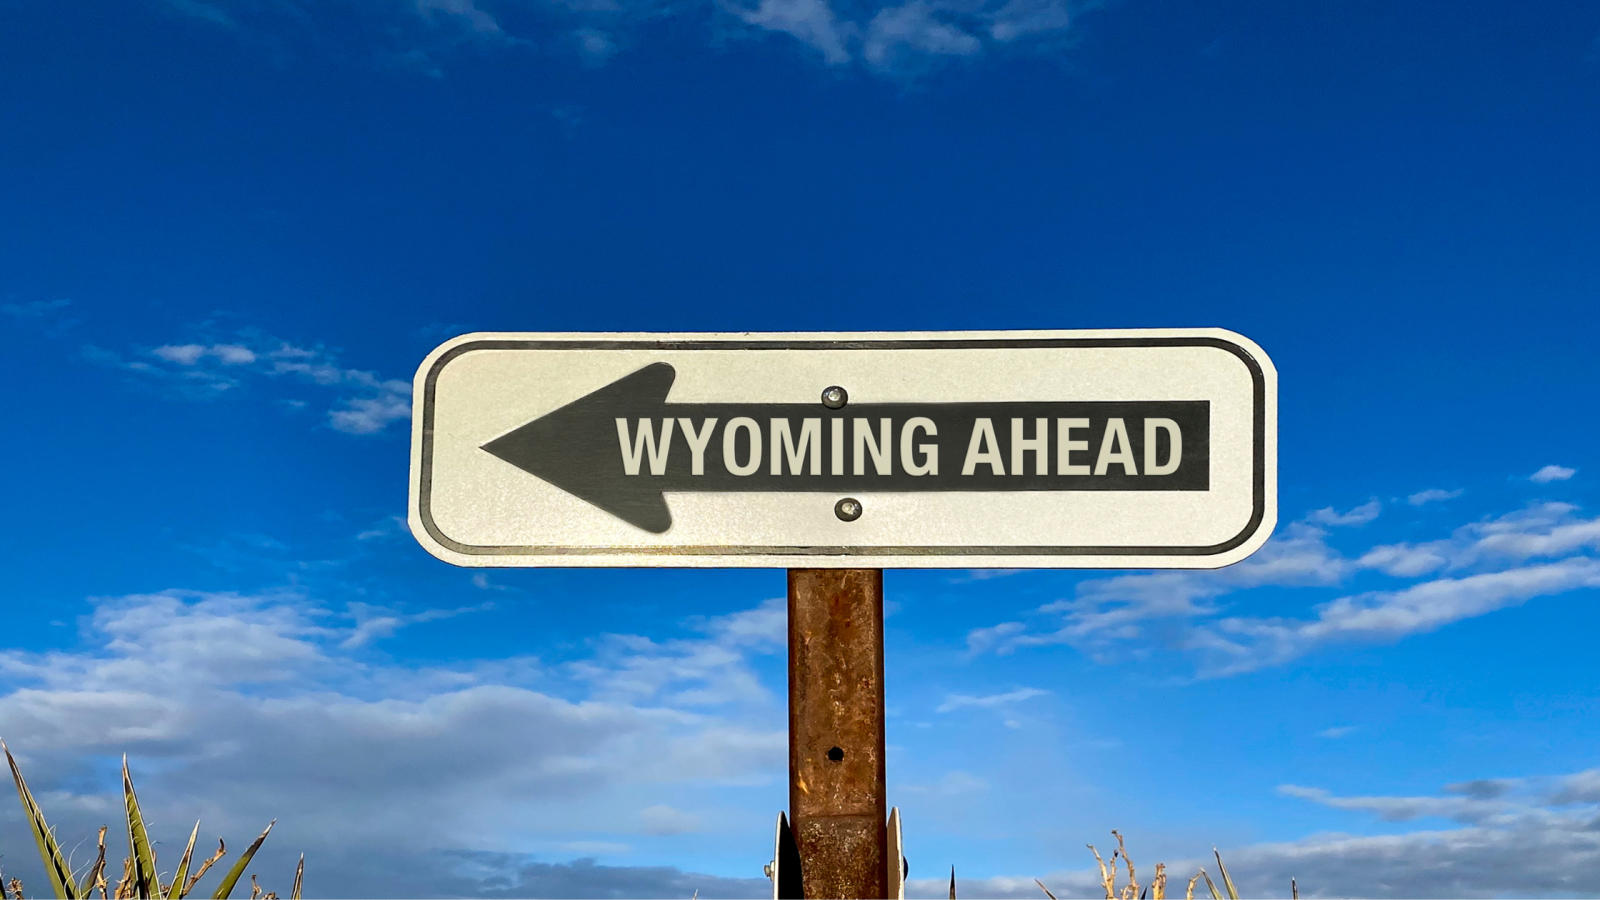 must-see places in wyoming